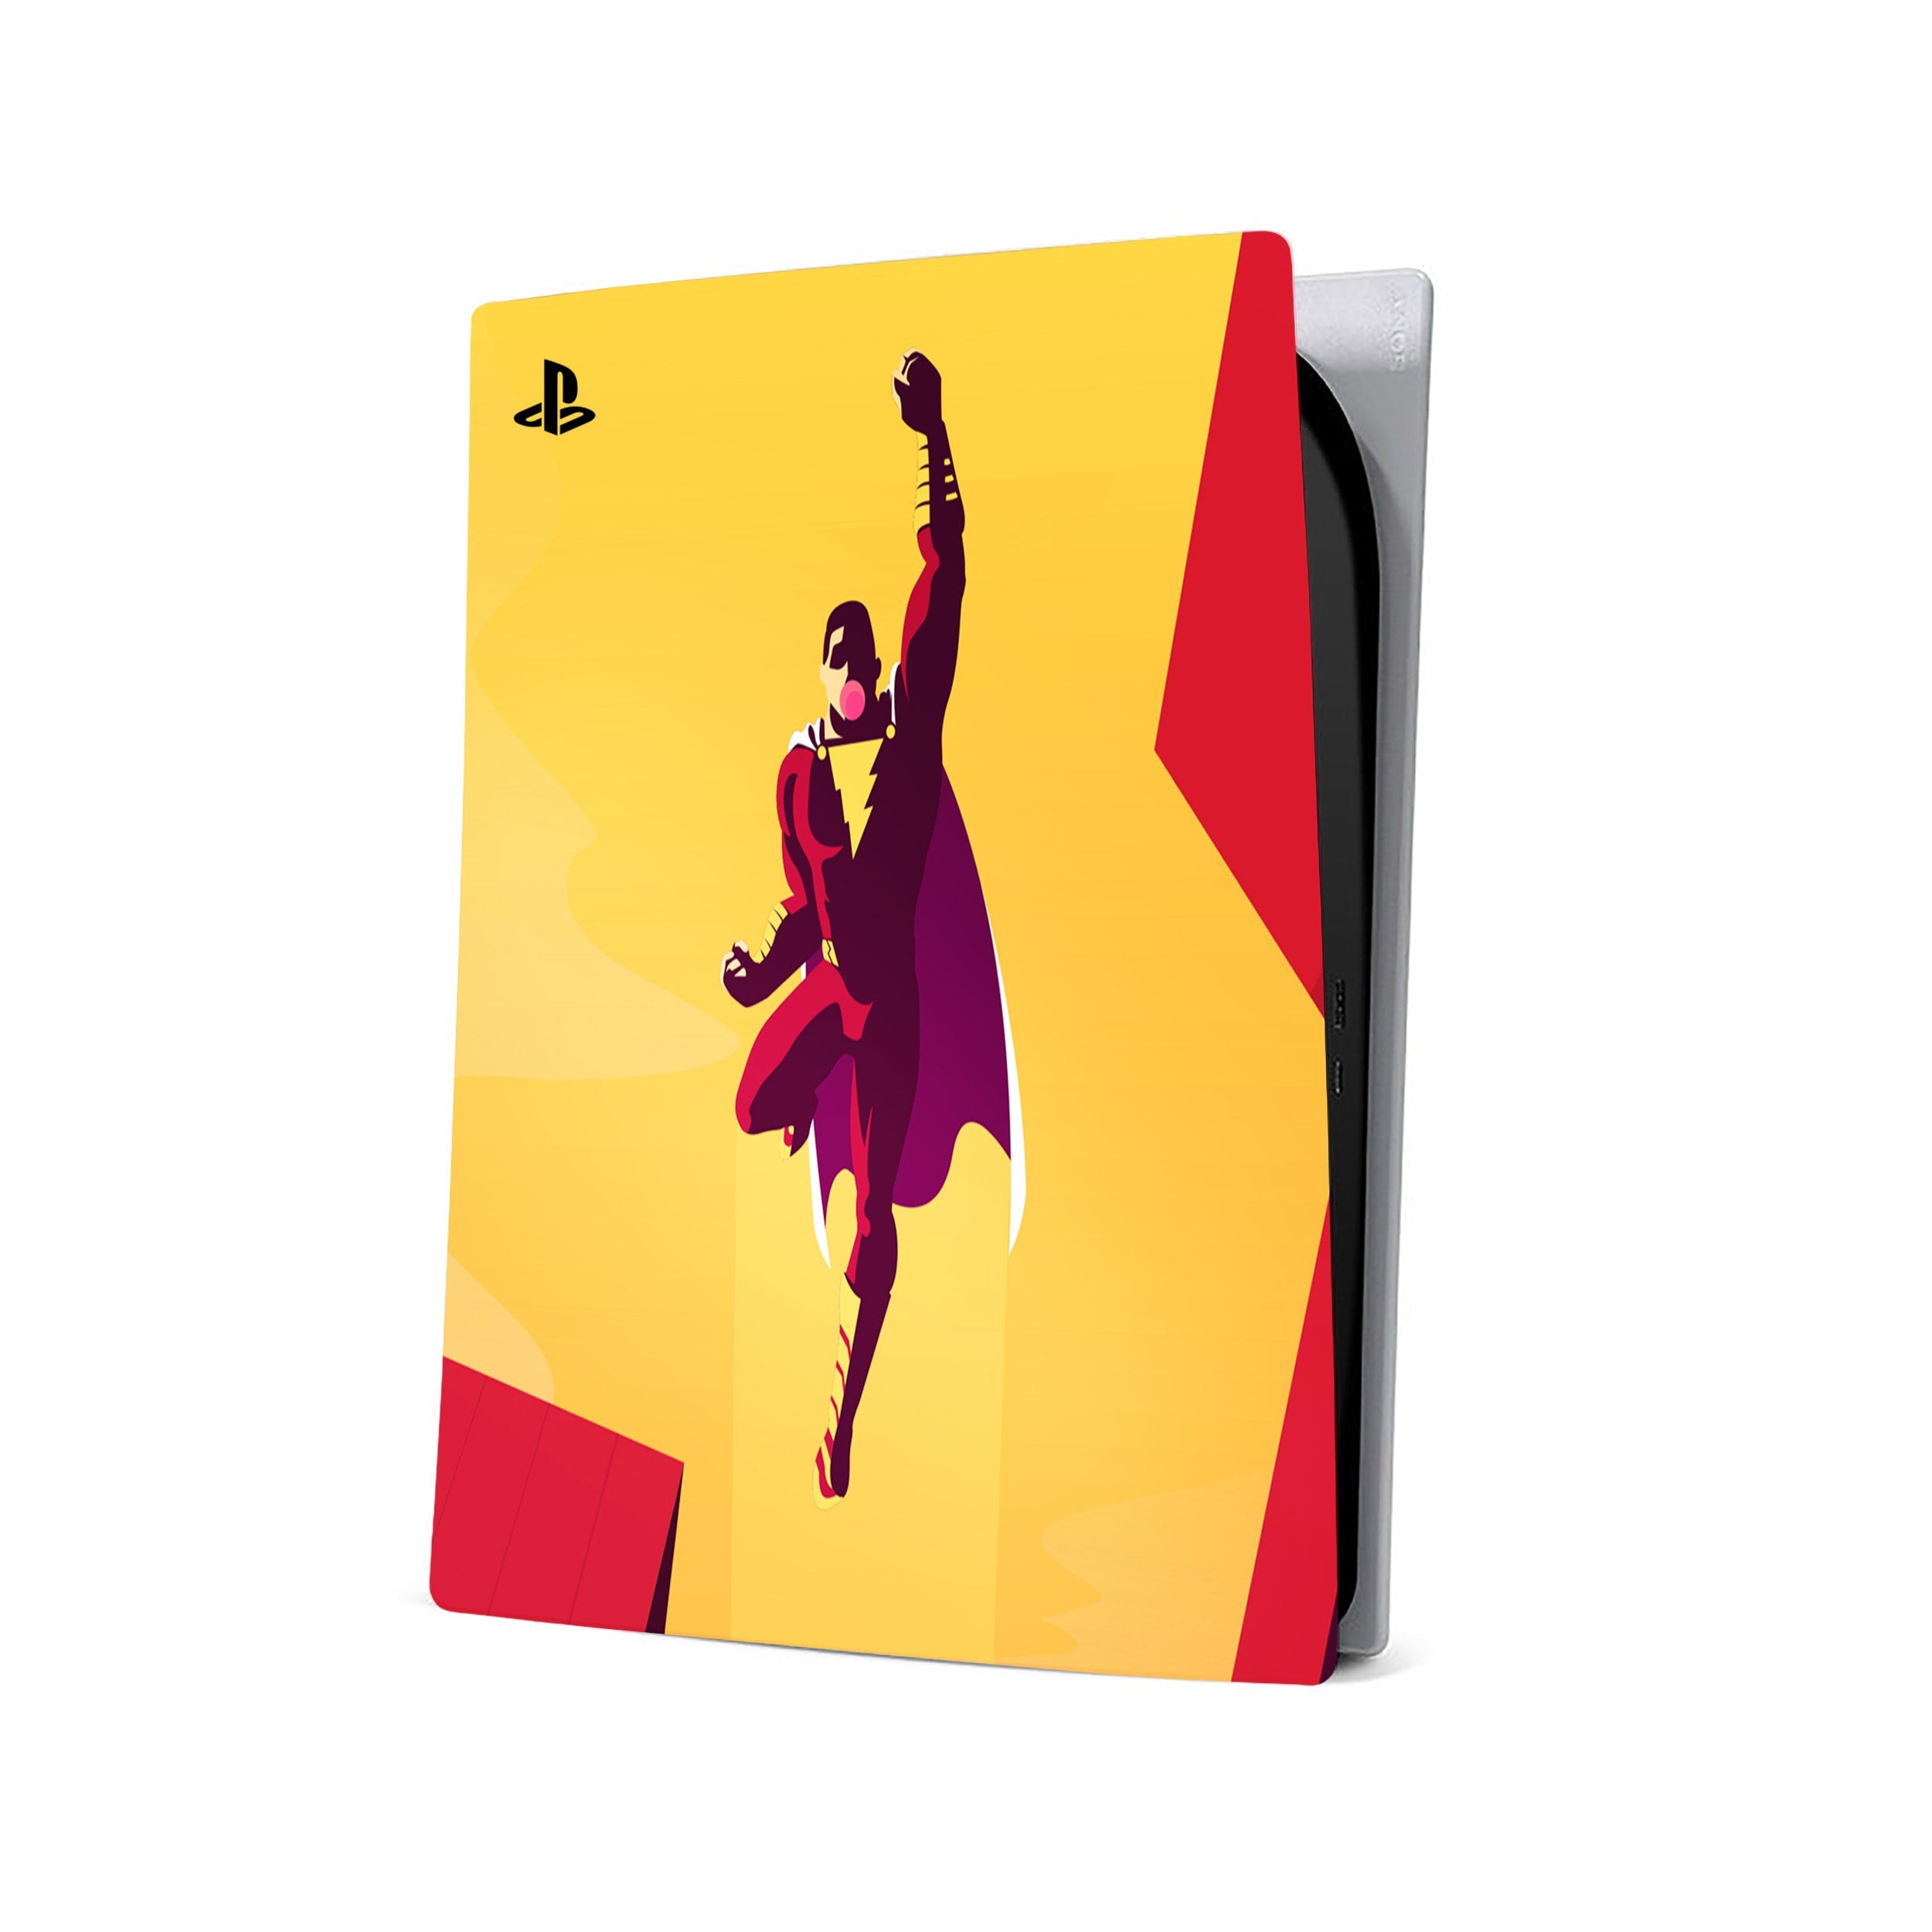 A video game skin featuring a DC Comics Shazam design for the PS5.